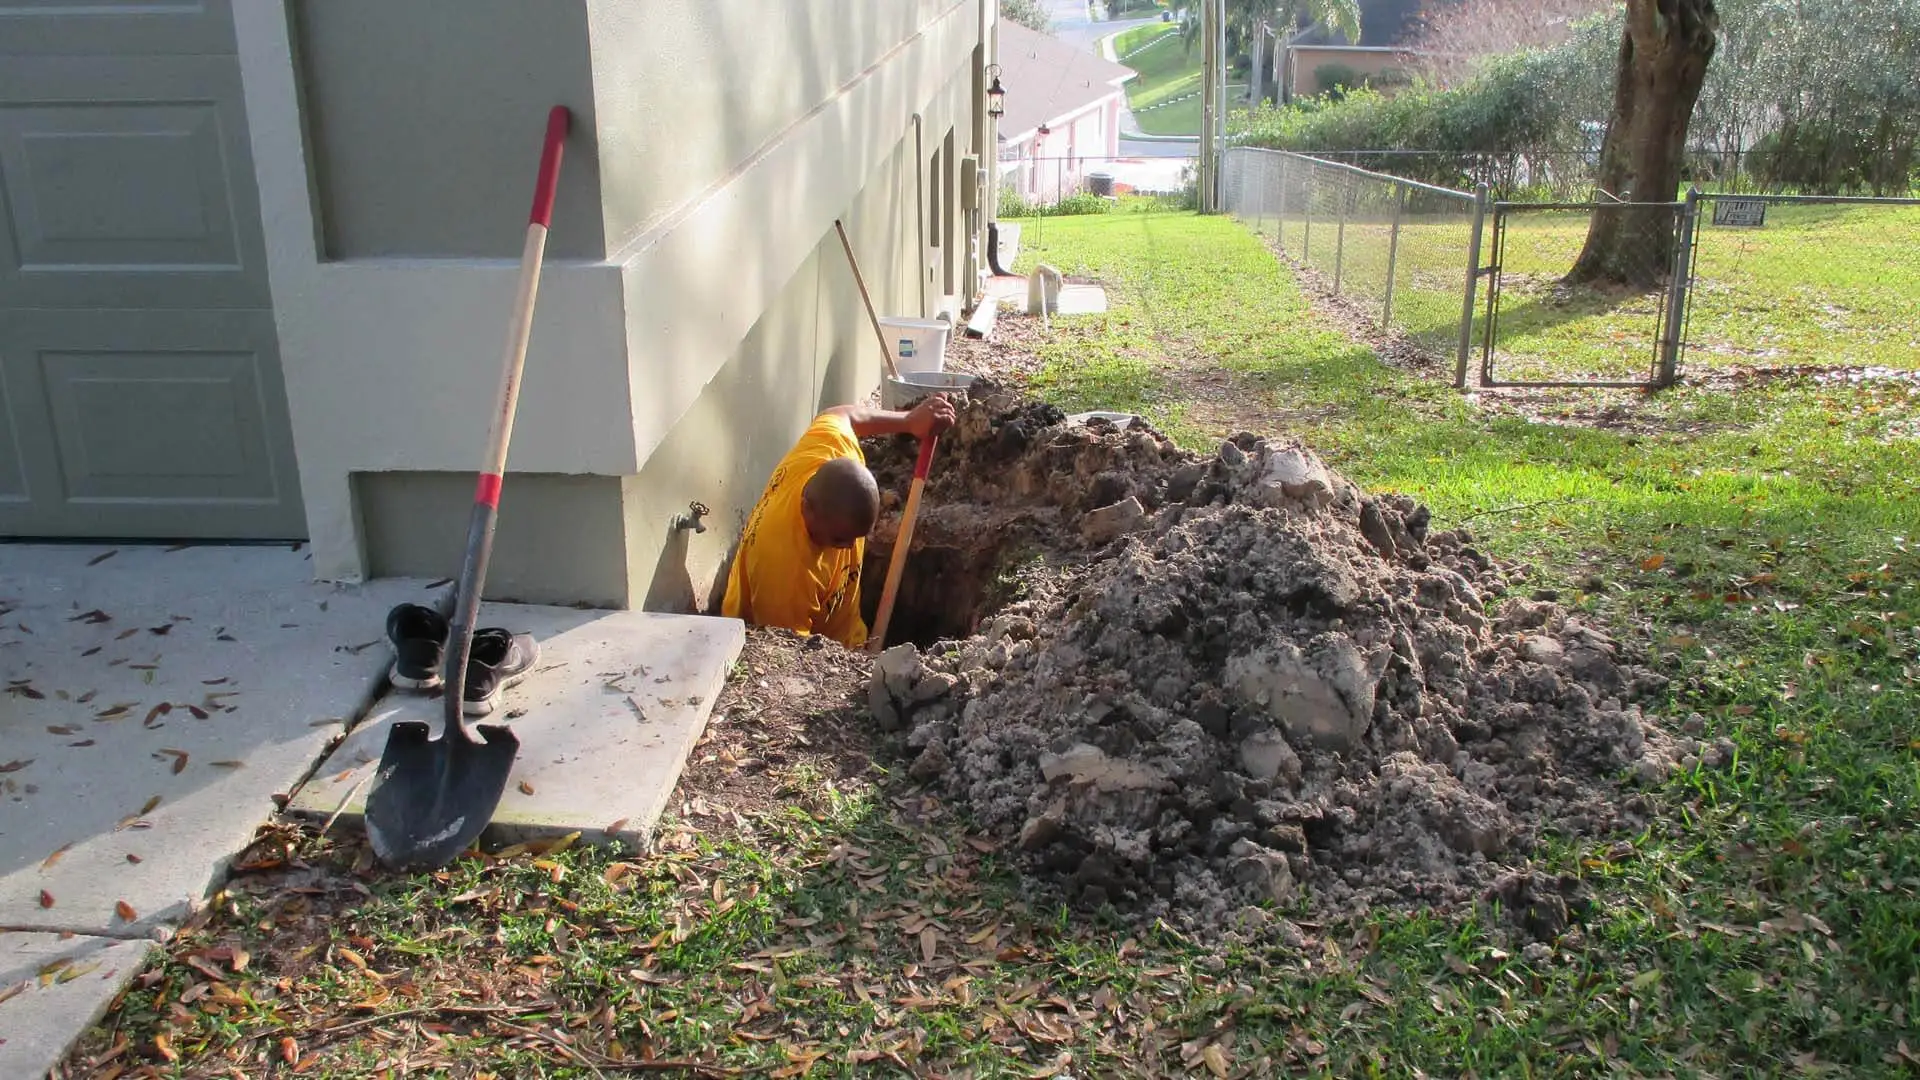 Underground repiping service for plumbing at home in Lakeland, FL.